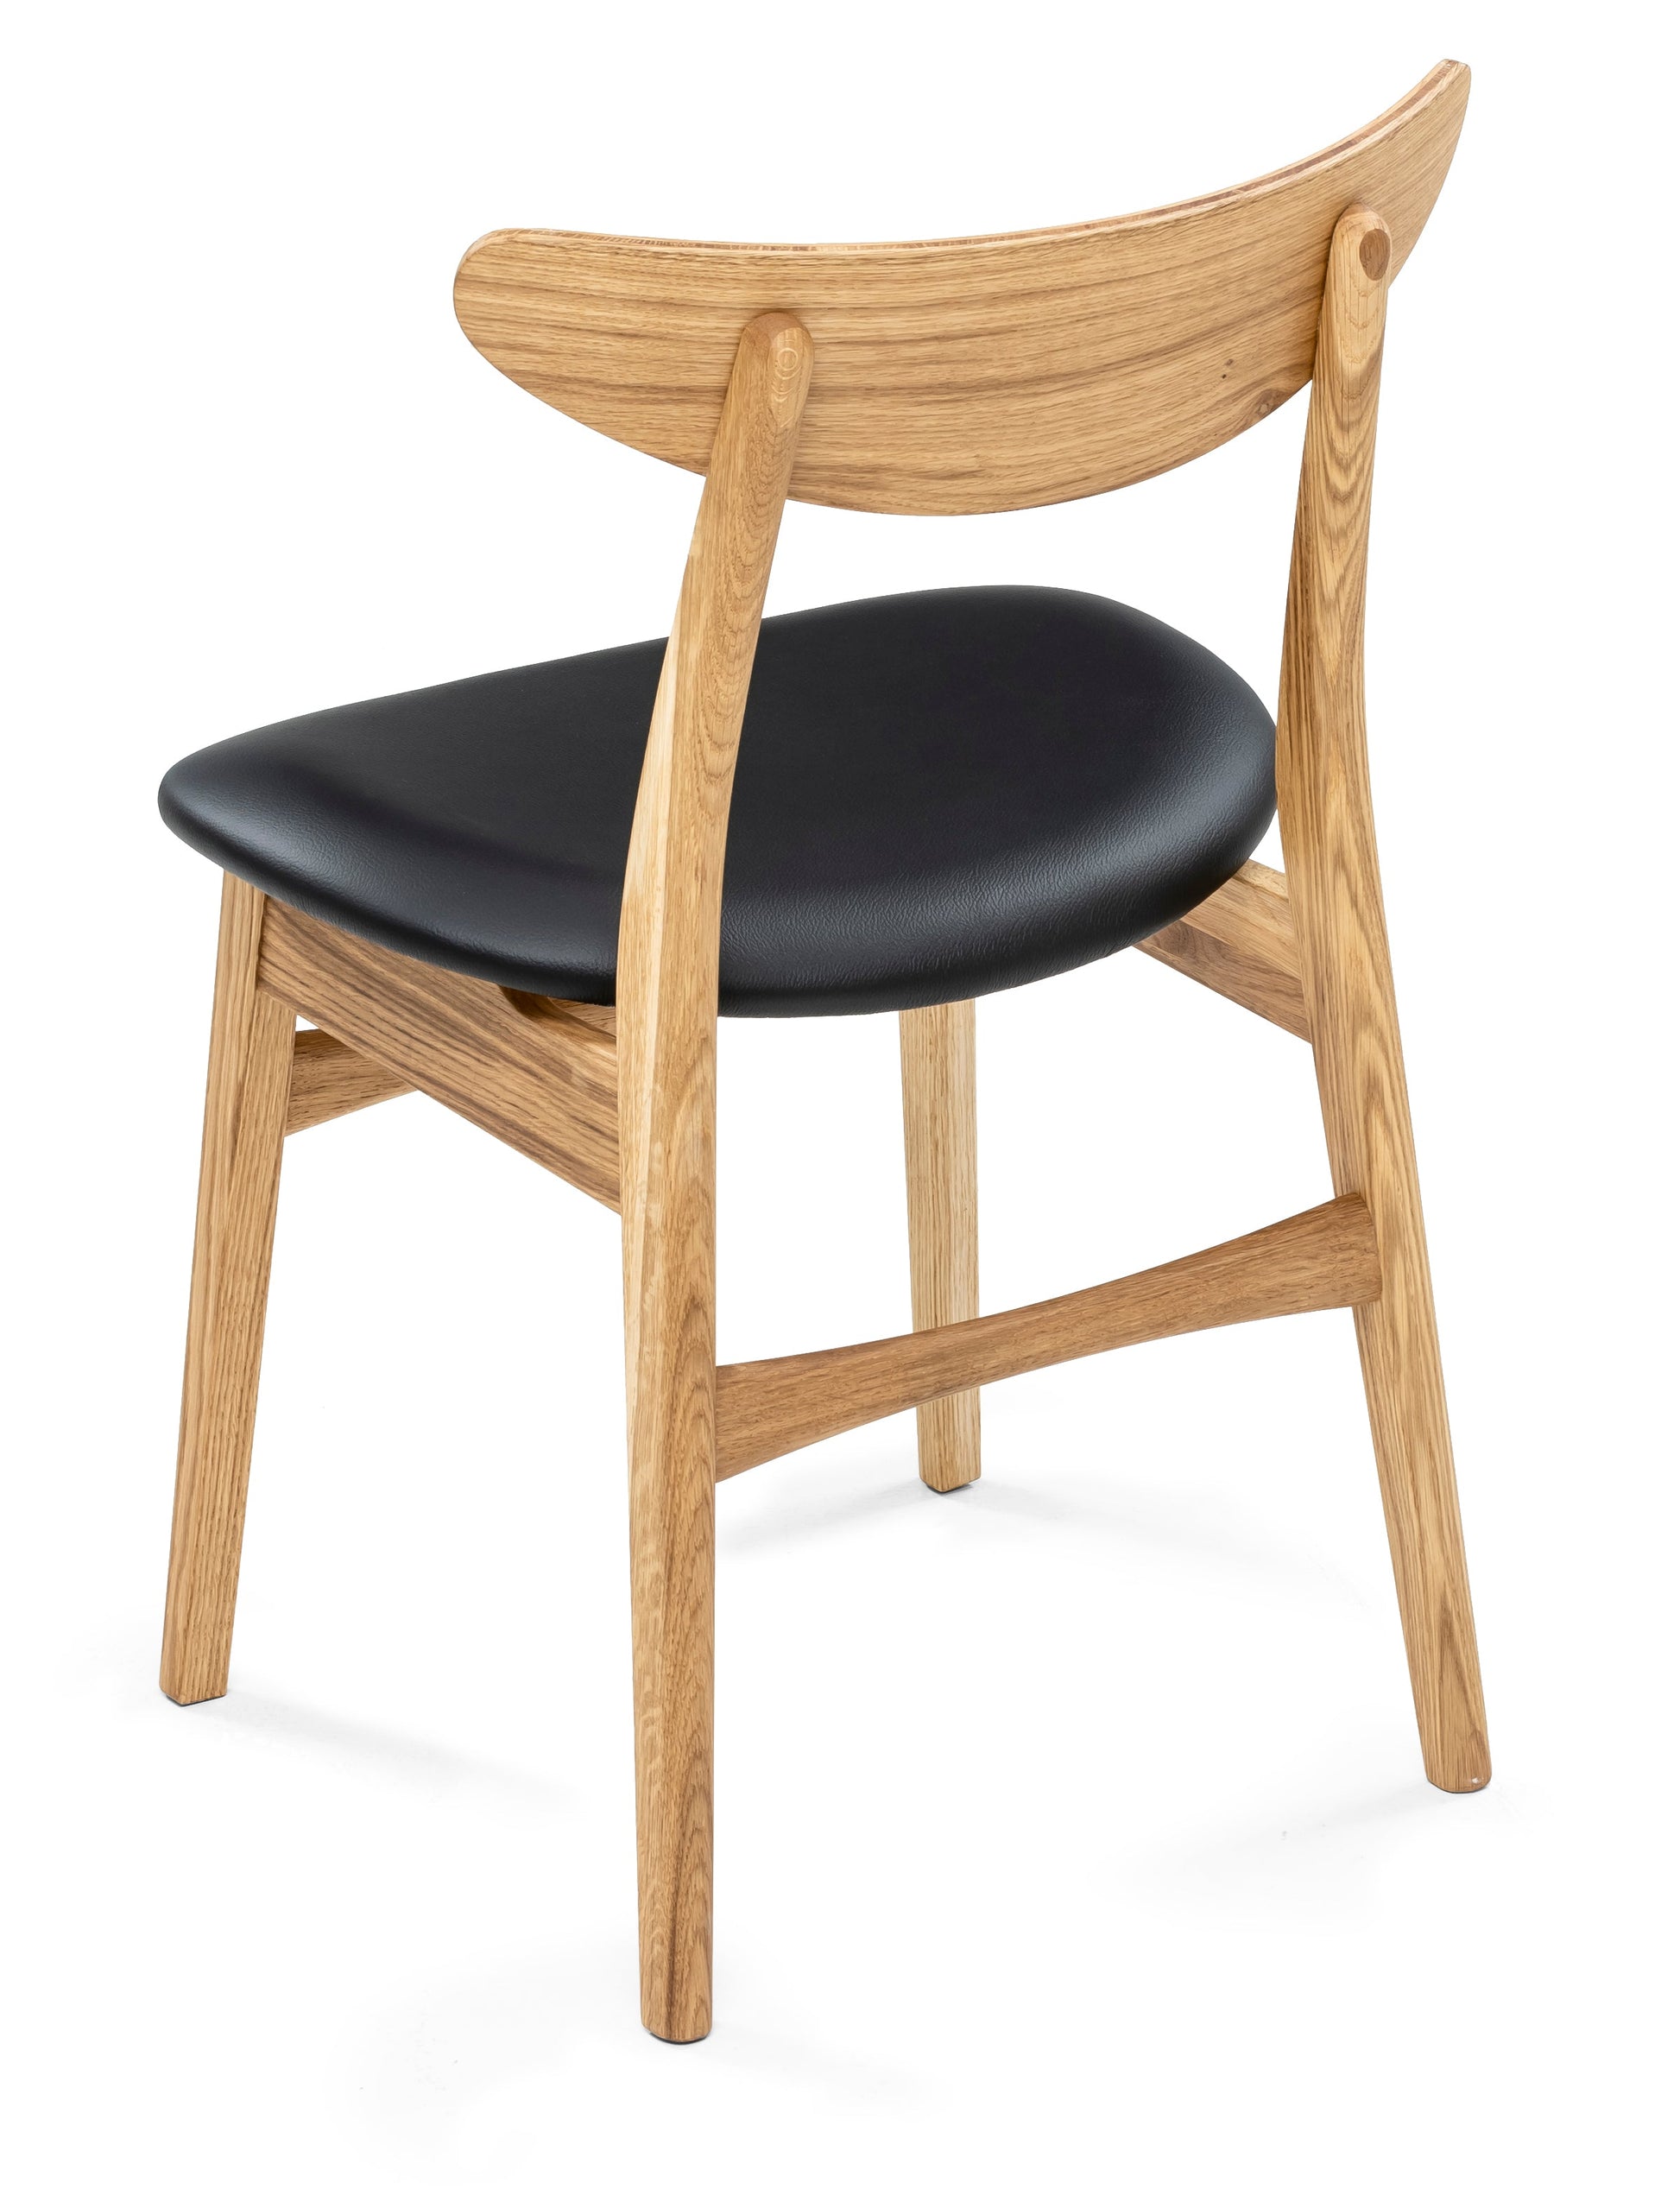 Oak Dining Chair - S10Home